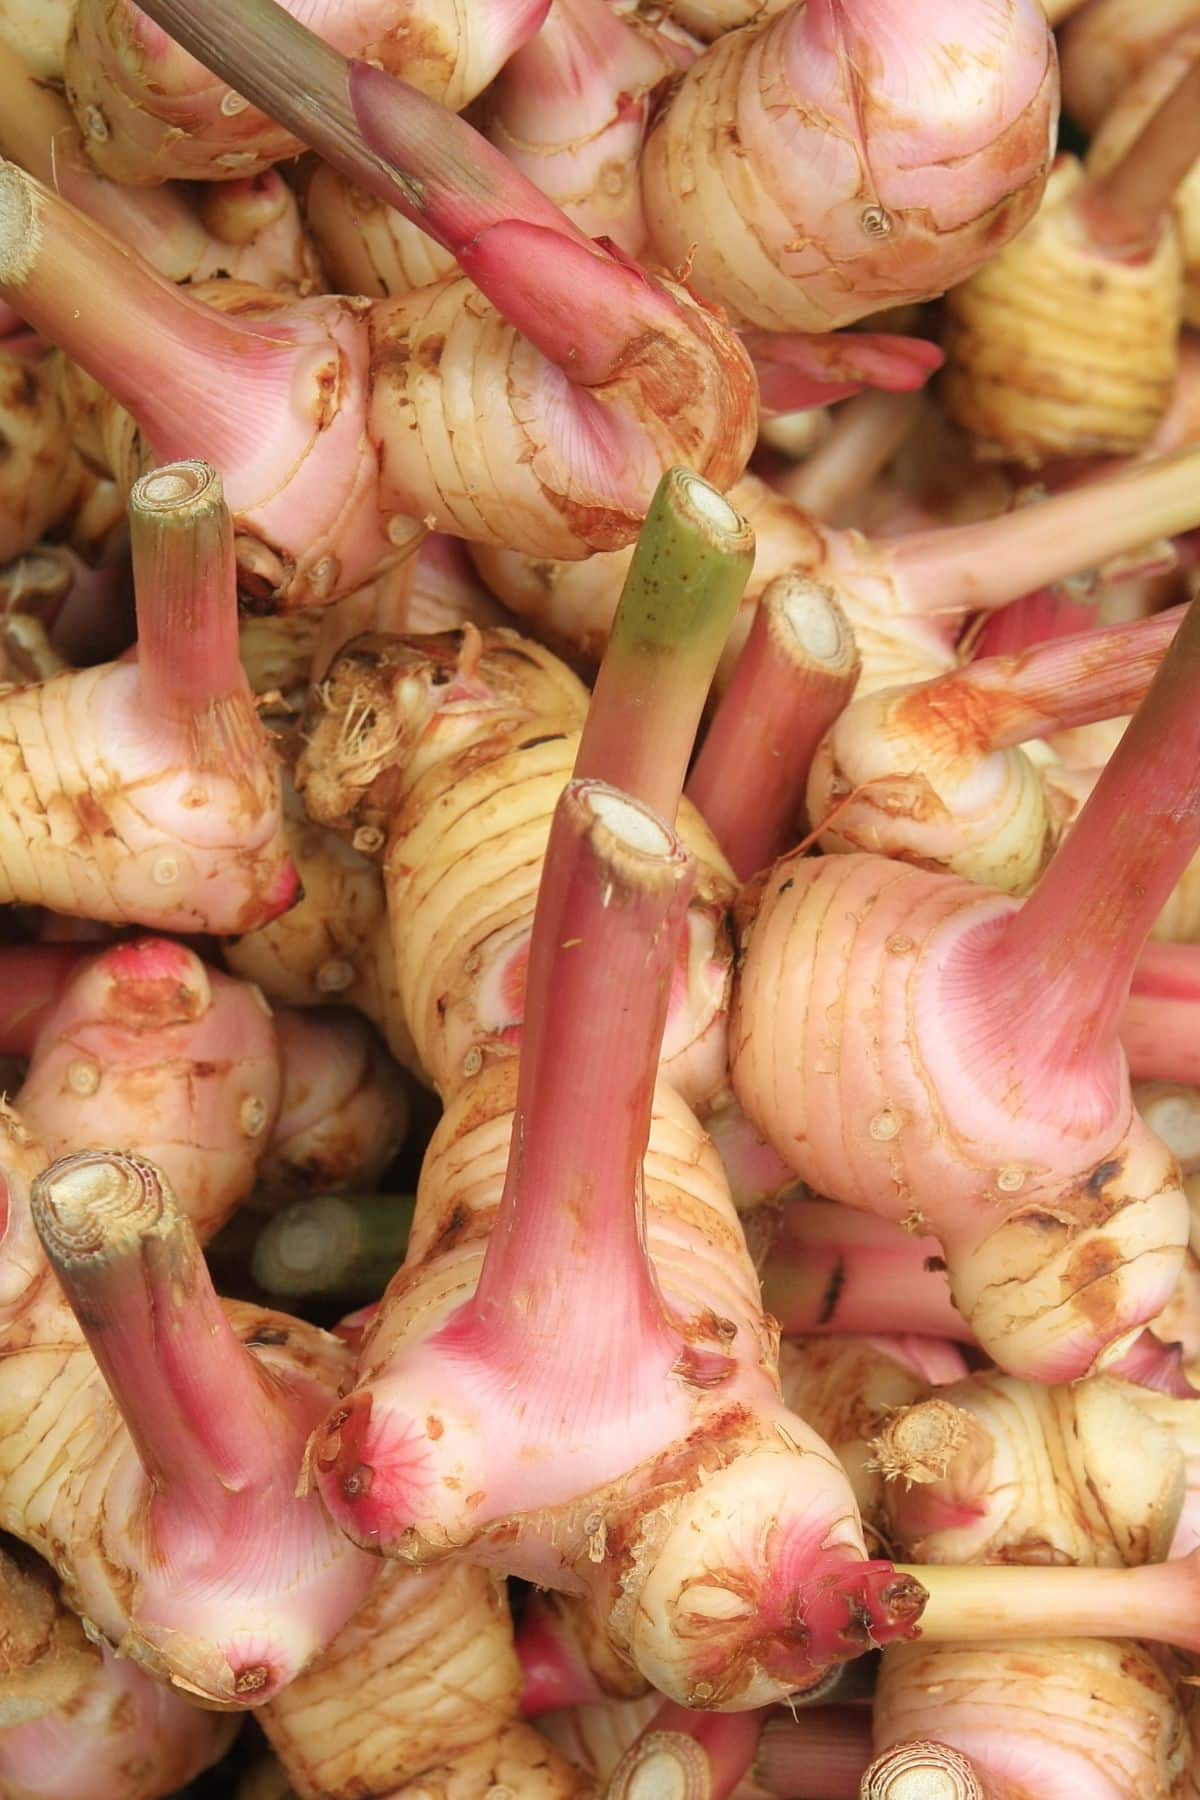 a close-up of a pile of galangal.